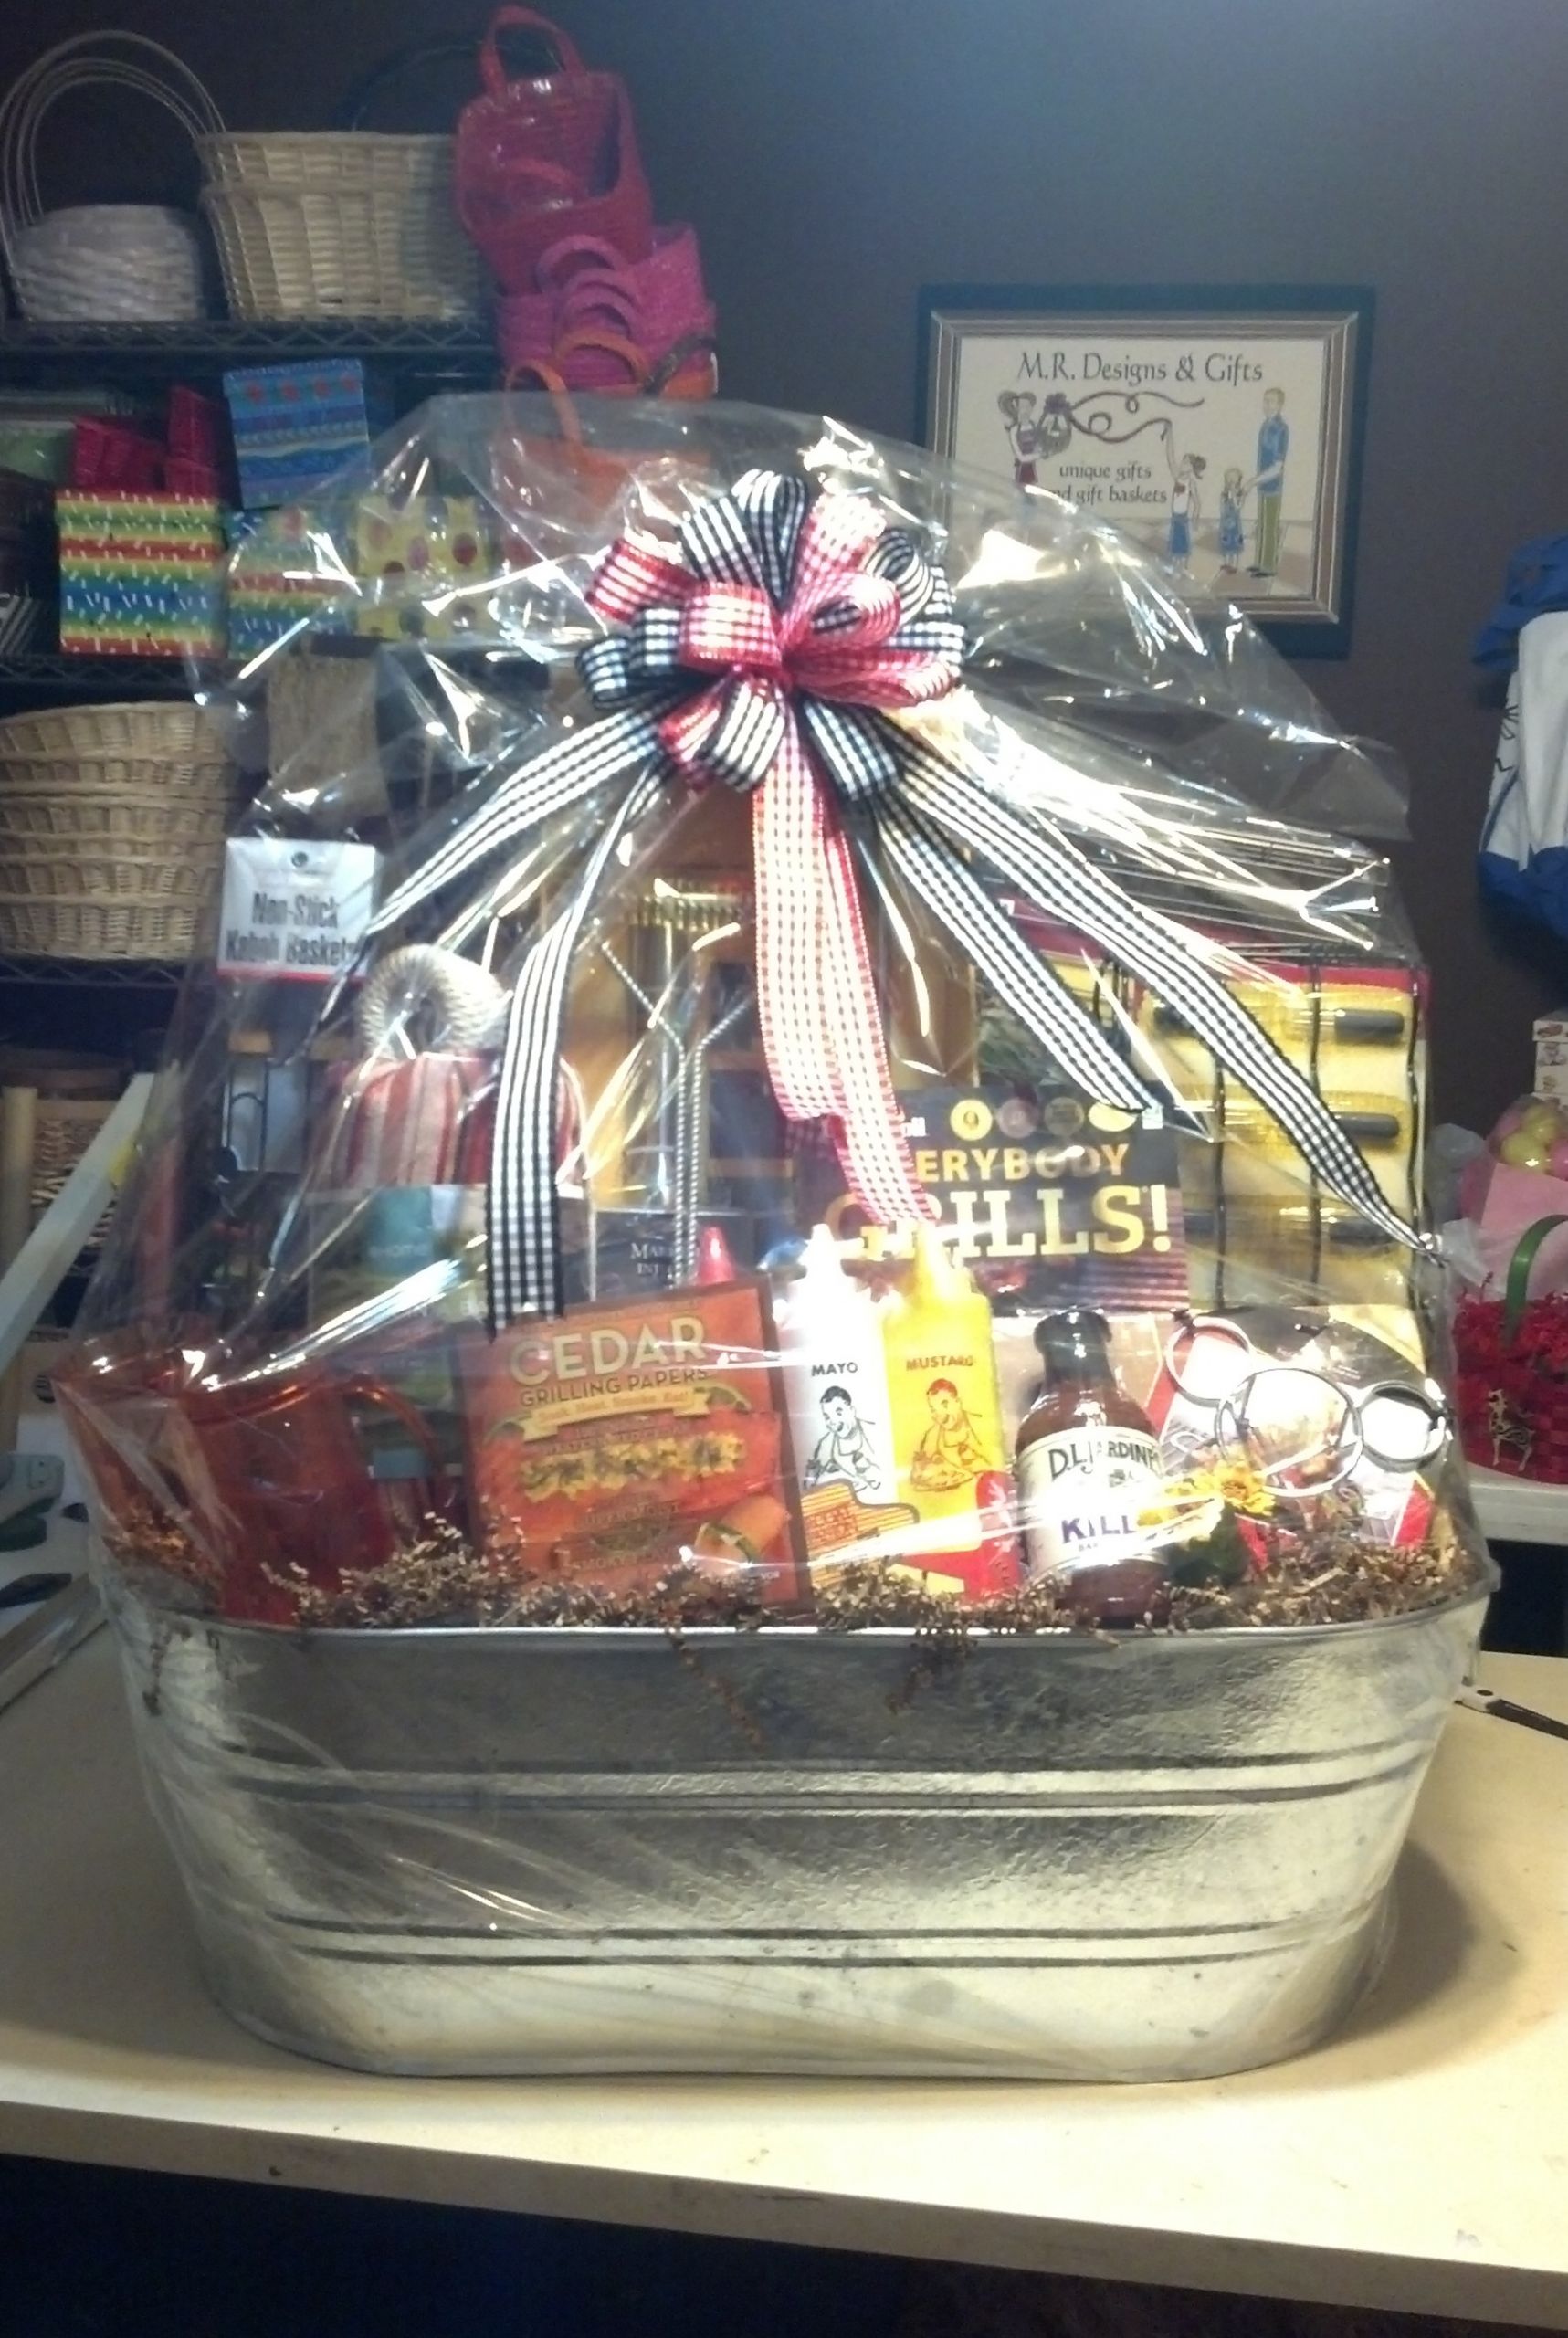 Ideas For Gift Baskets To Auction
 Special Event and Silent Auction Gift Basket Ideas by M R